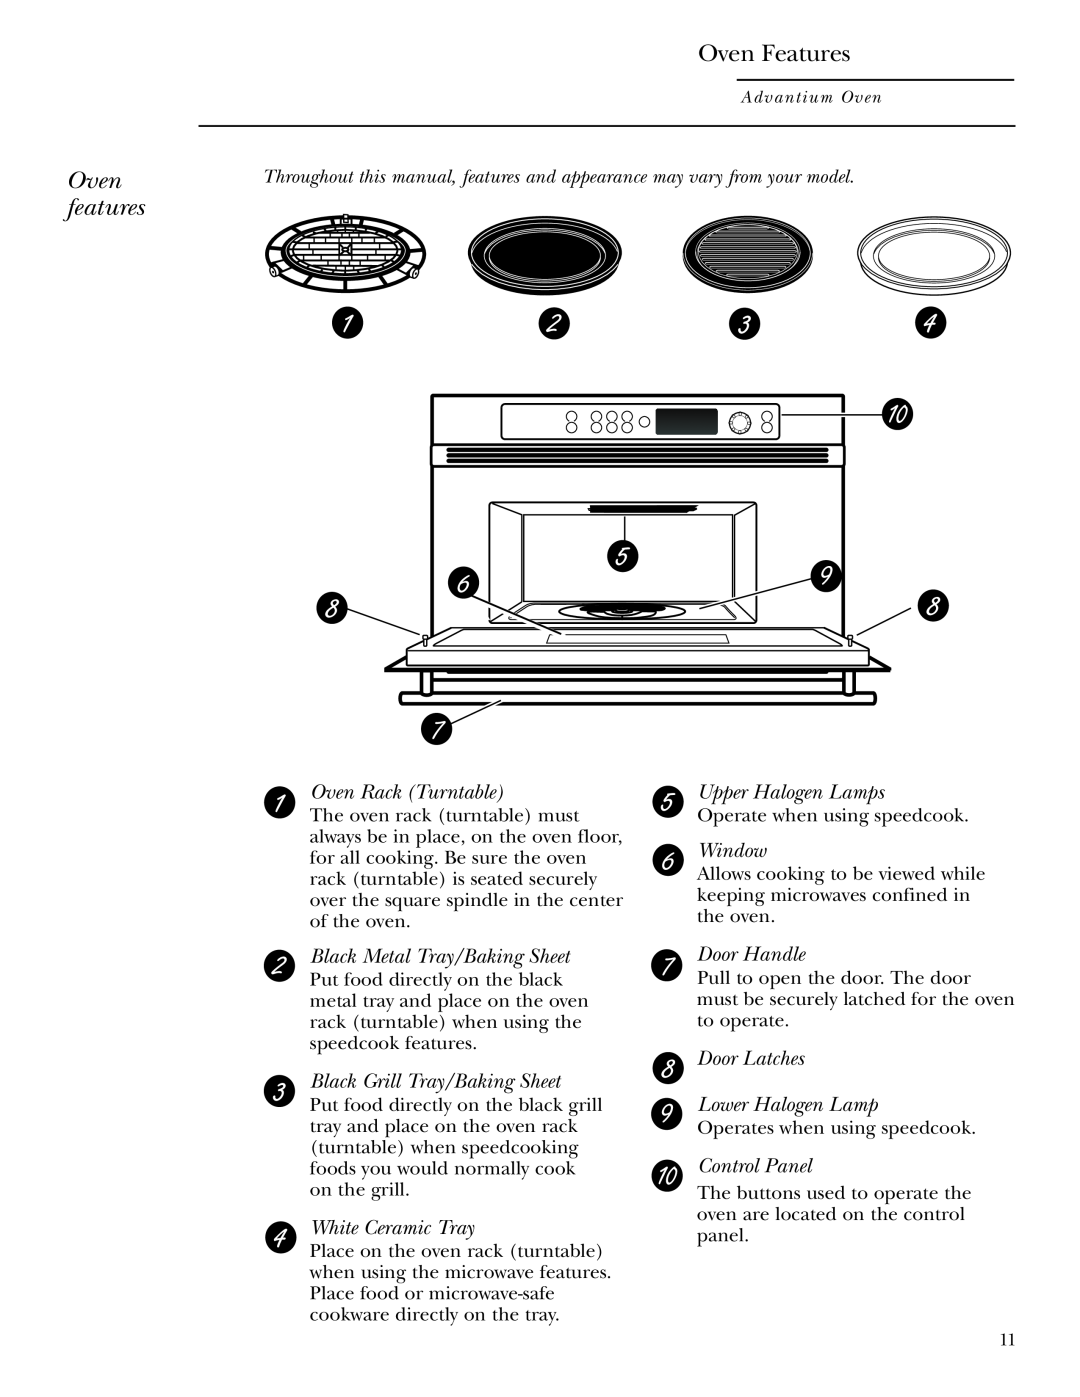 Anchor Hocking Glass ZSC2000 Oven Features, Oven features, Oven Rack Turntable, Black Metal Tray/Baking Sheet, Window 